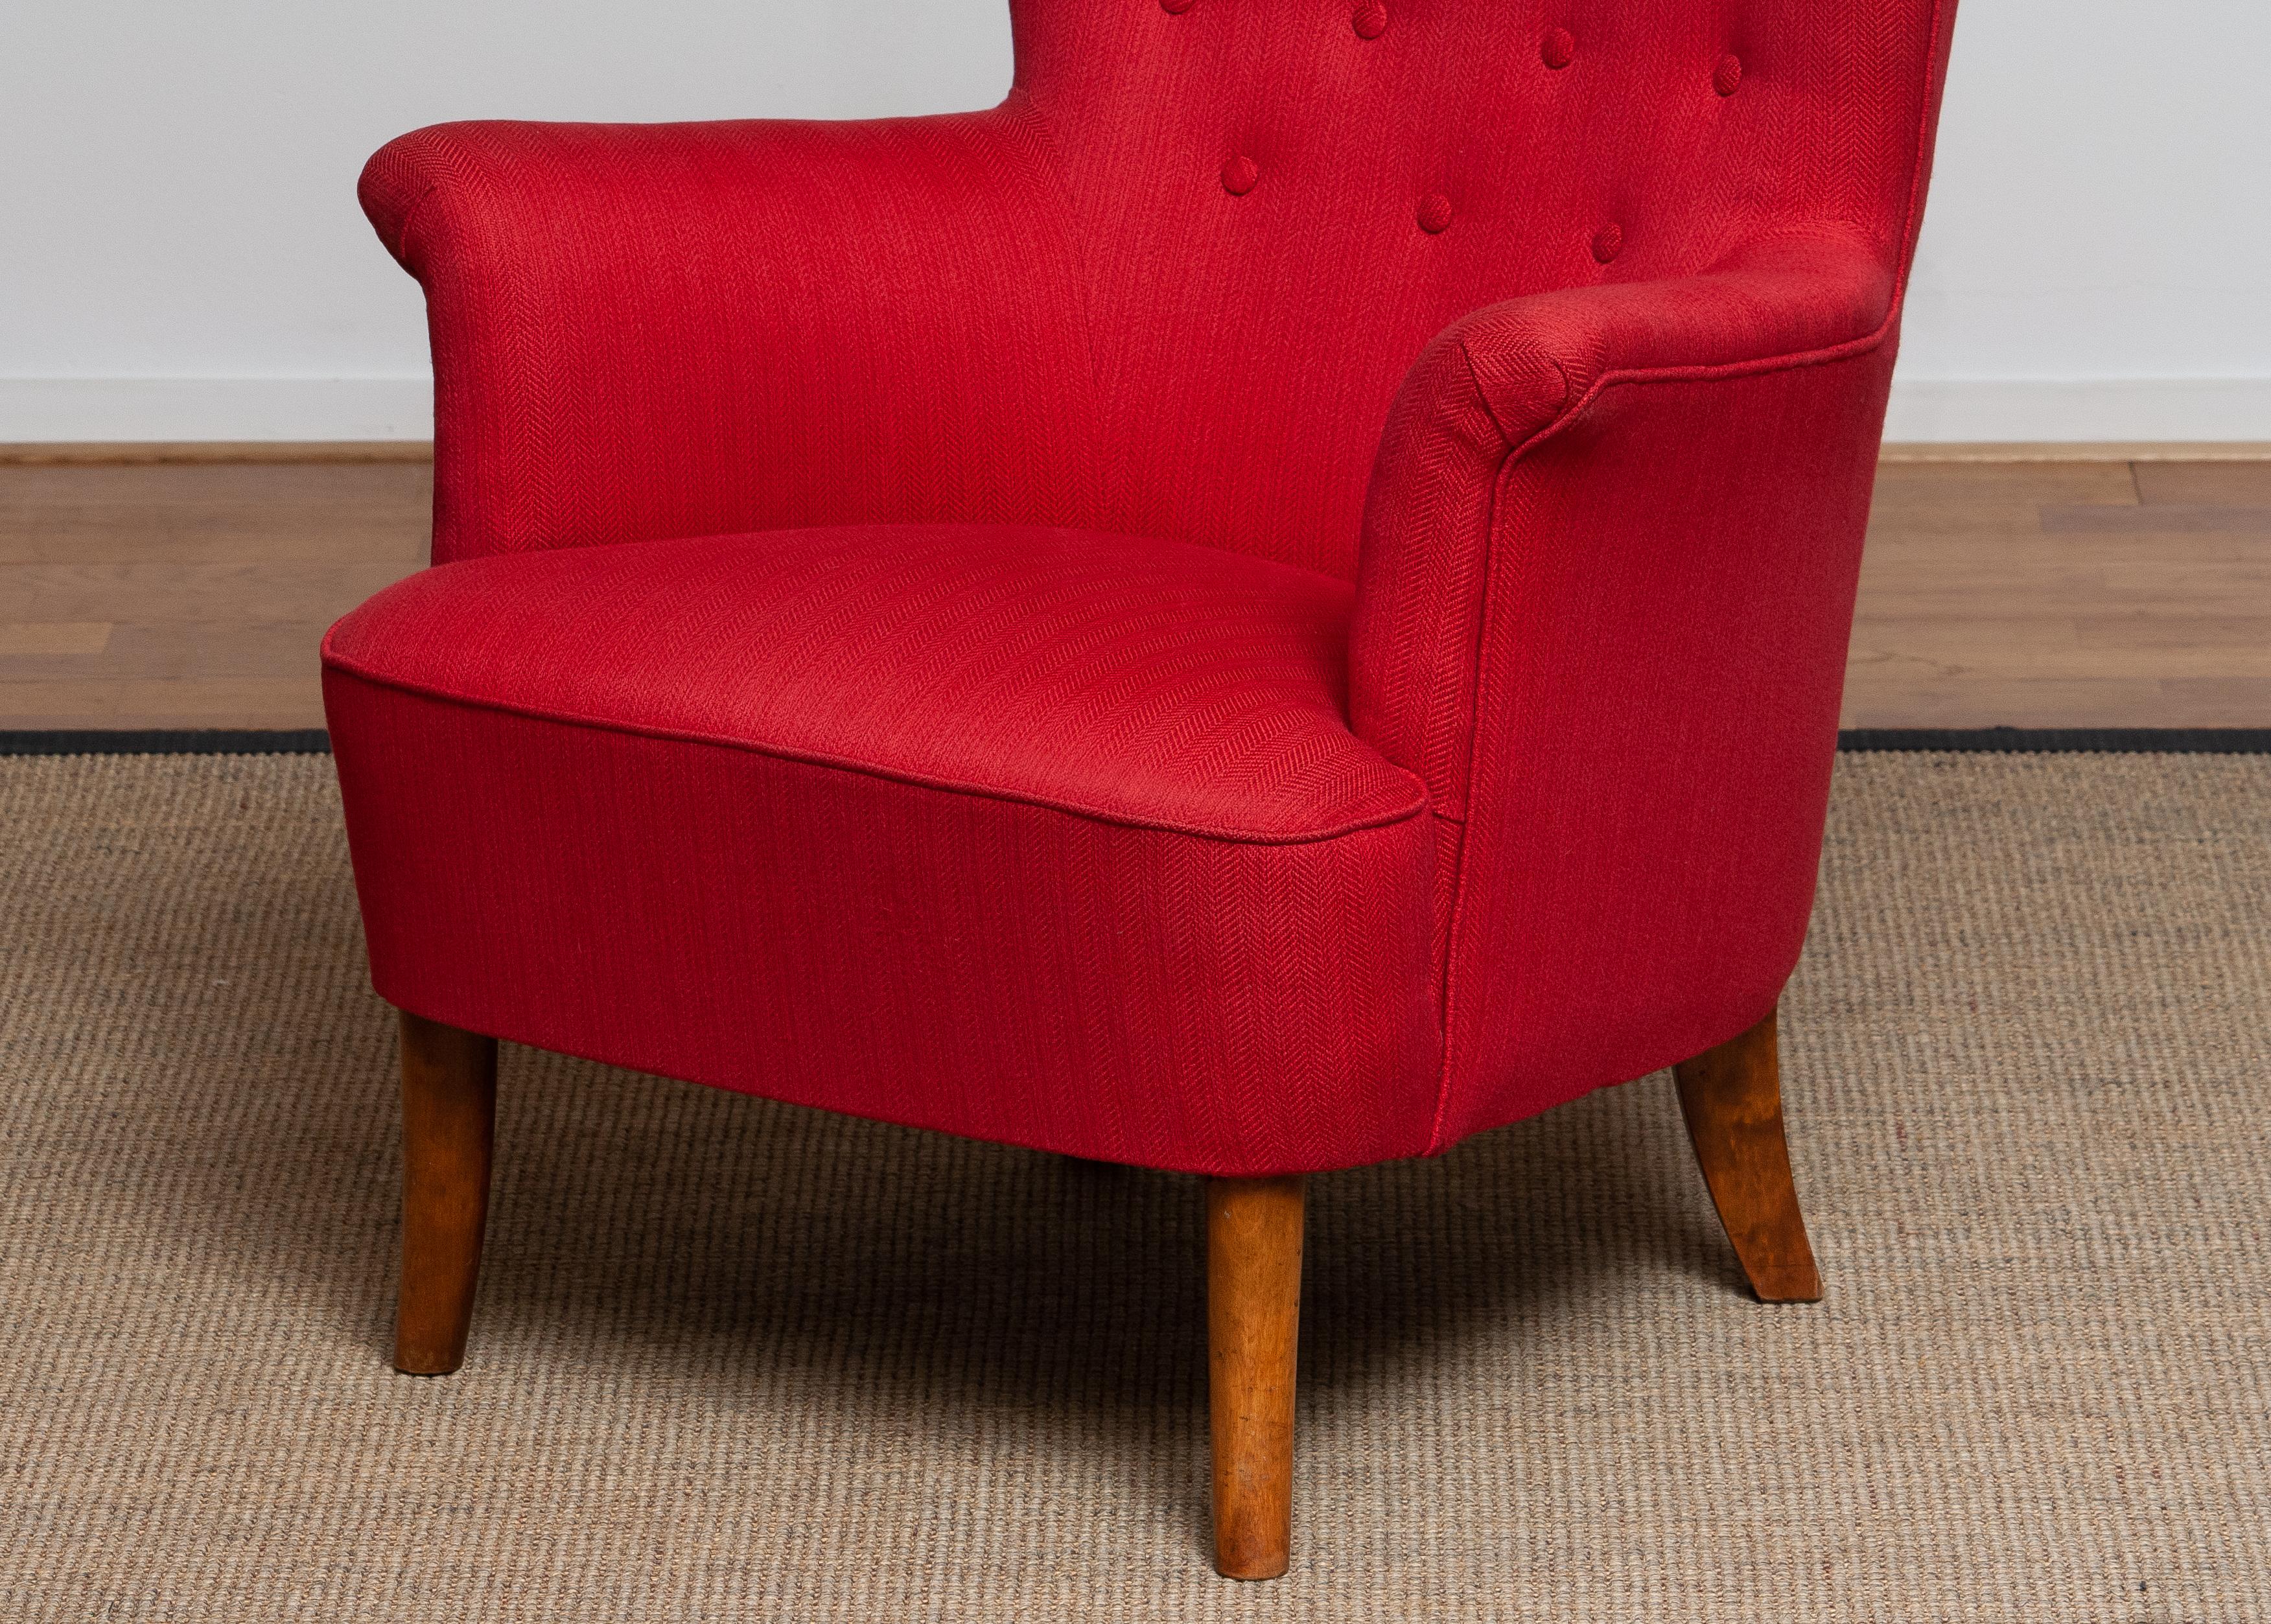 Mid-20th Century 1940s, Fuchsia Red Club Lounge Chair by Carl Malmsten for OH Sjogren, Sweden